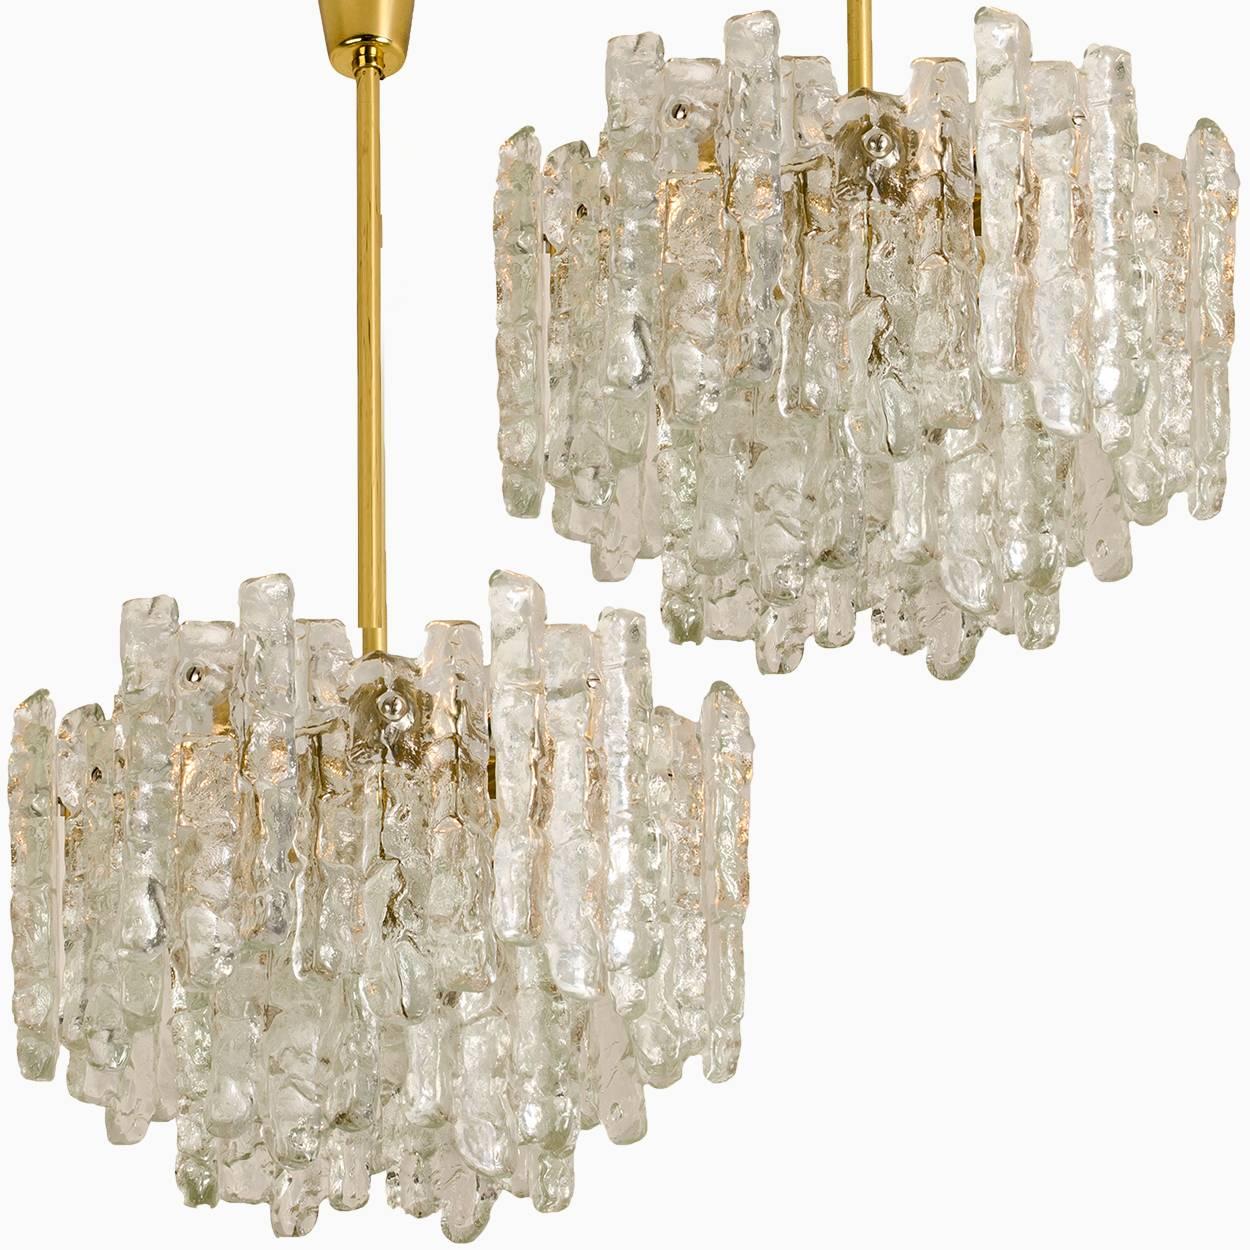 Pair of beautiful and elegant modern brass chandeliers, manufactured by Kalmar Austria in the 1970s. Lovely design, executed to a very high standard. Each chandelier has two layers of extremely stylish textured solid ice glass sheets (18 pieces)